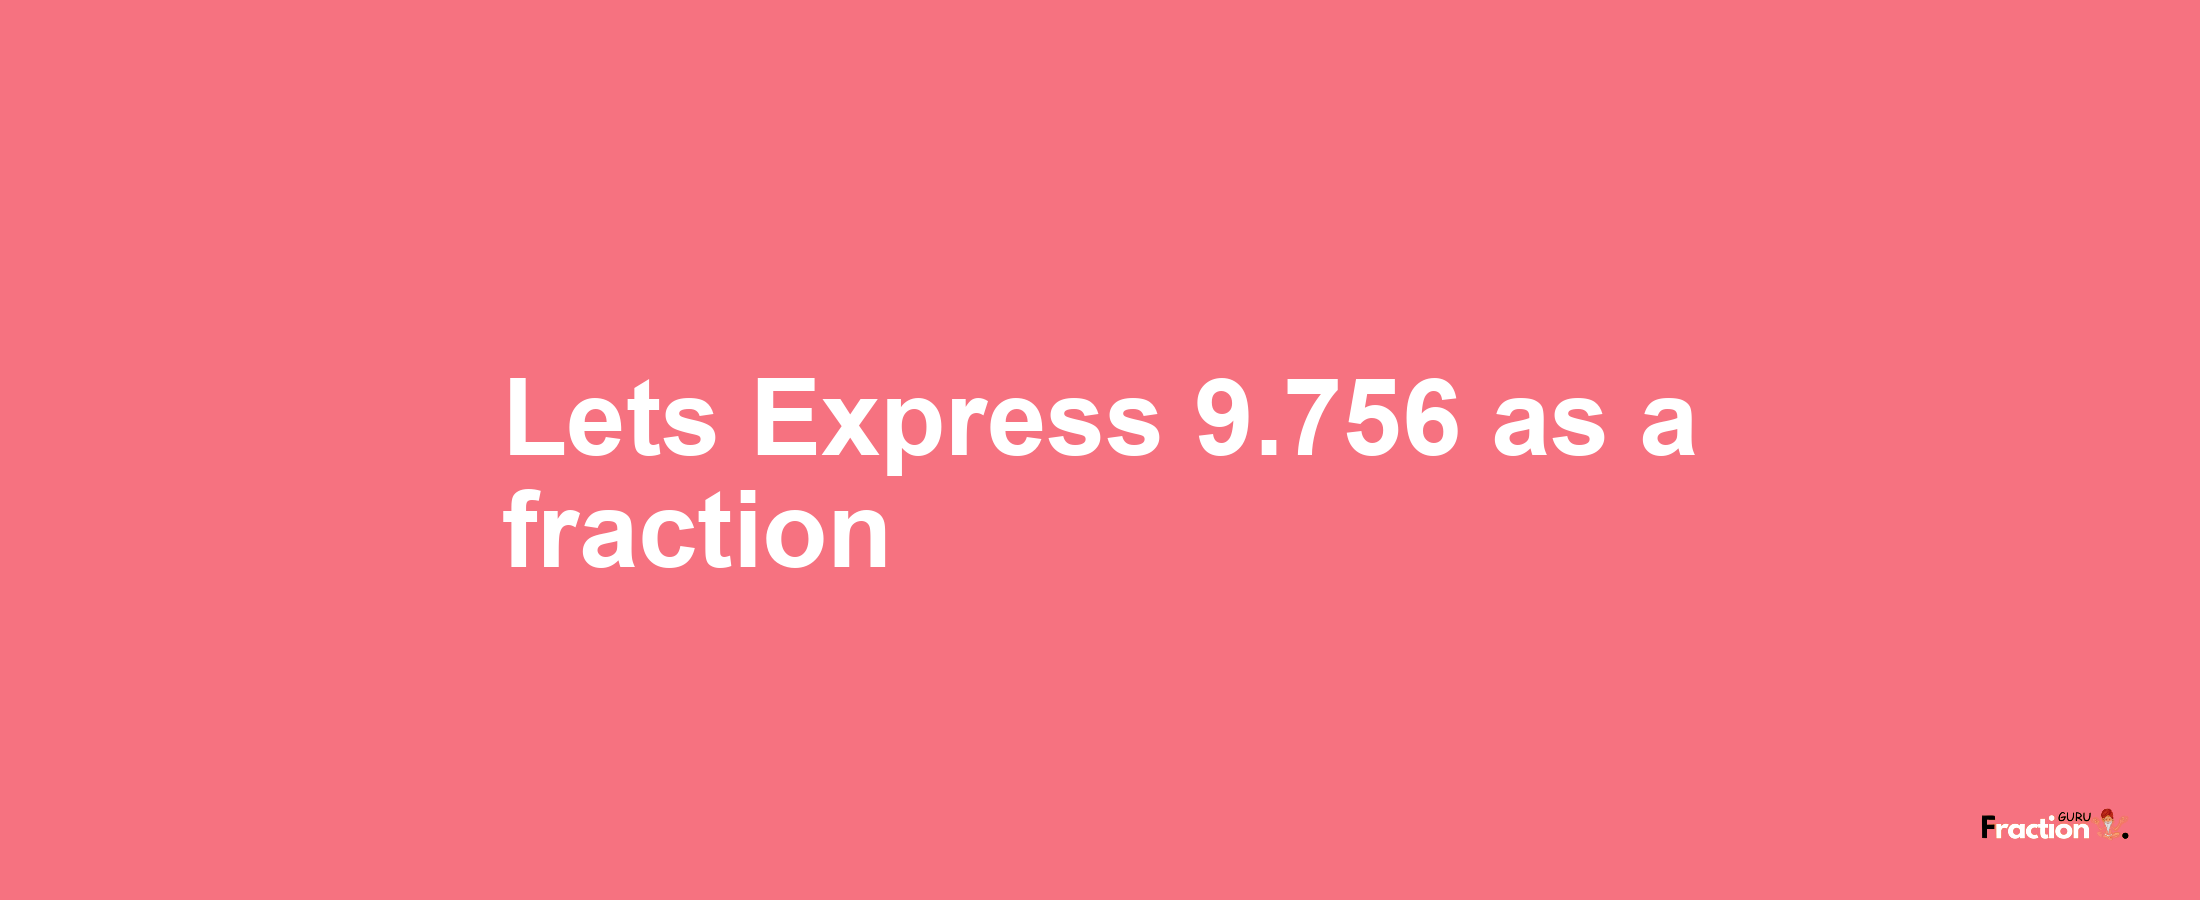 Lets Express 9.756 as afraction